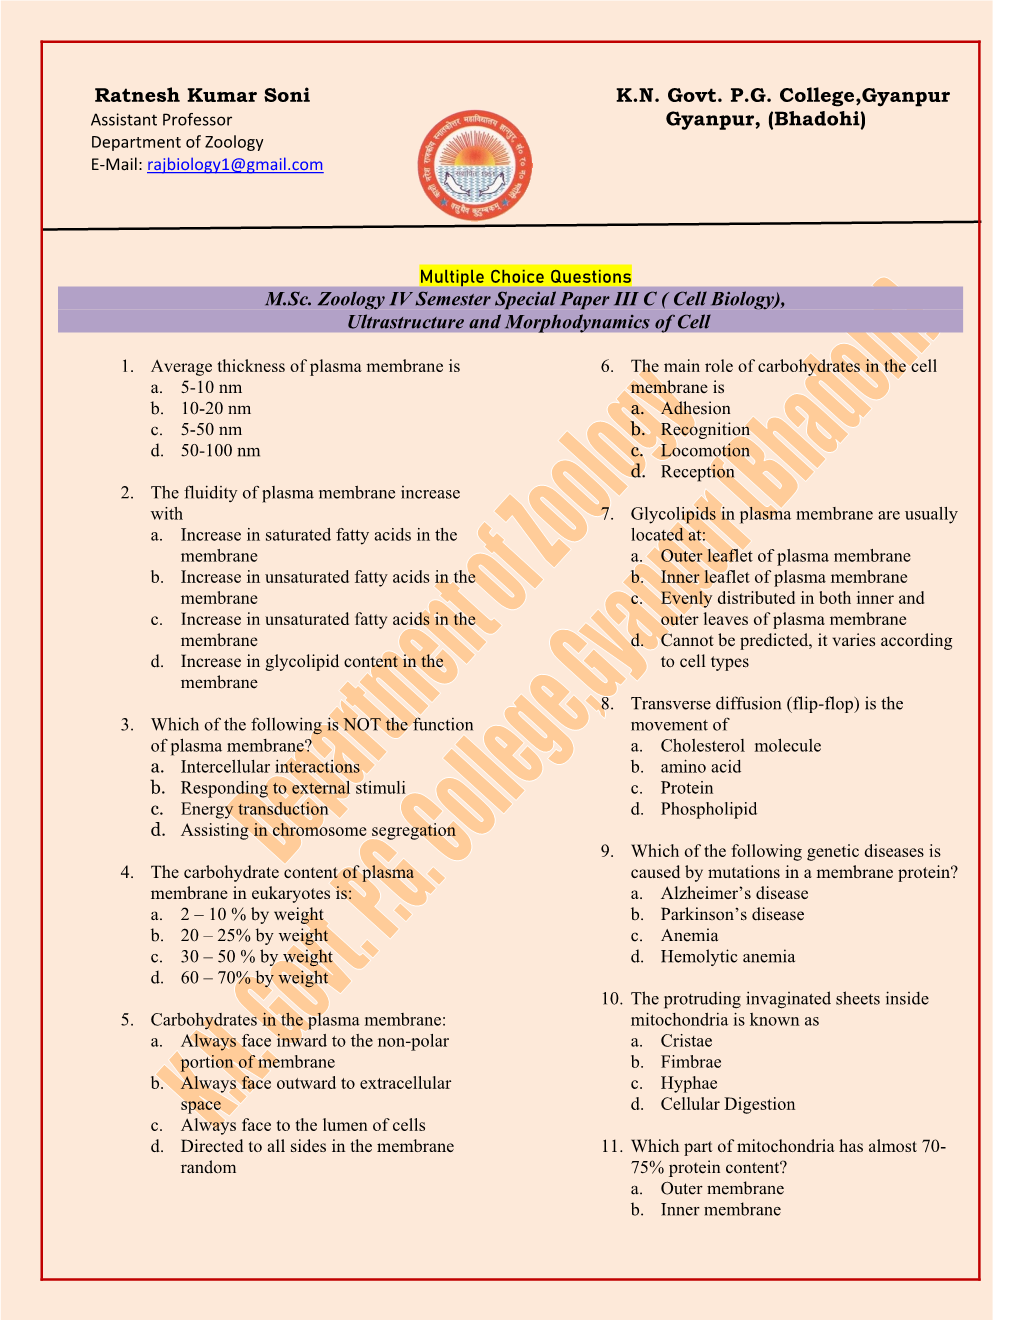 (Bhadohi) M.Sc. Zoology IV Semester Special Paper III C